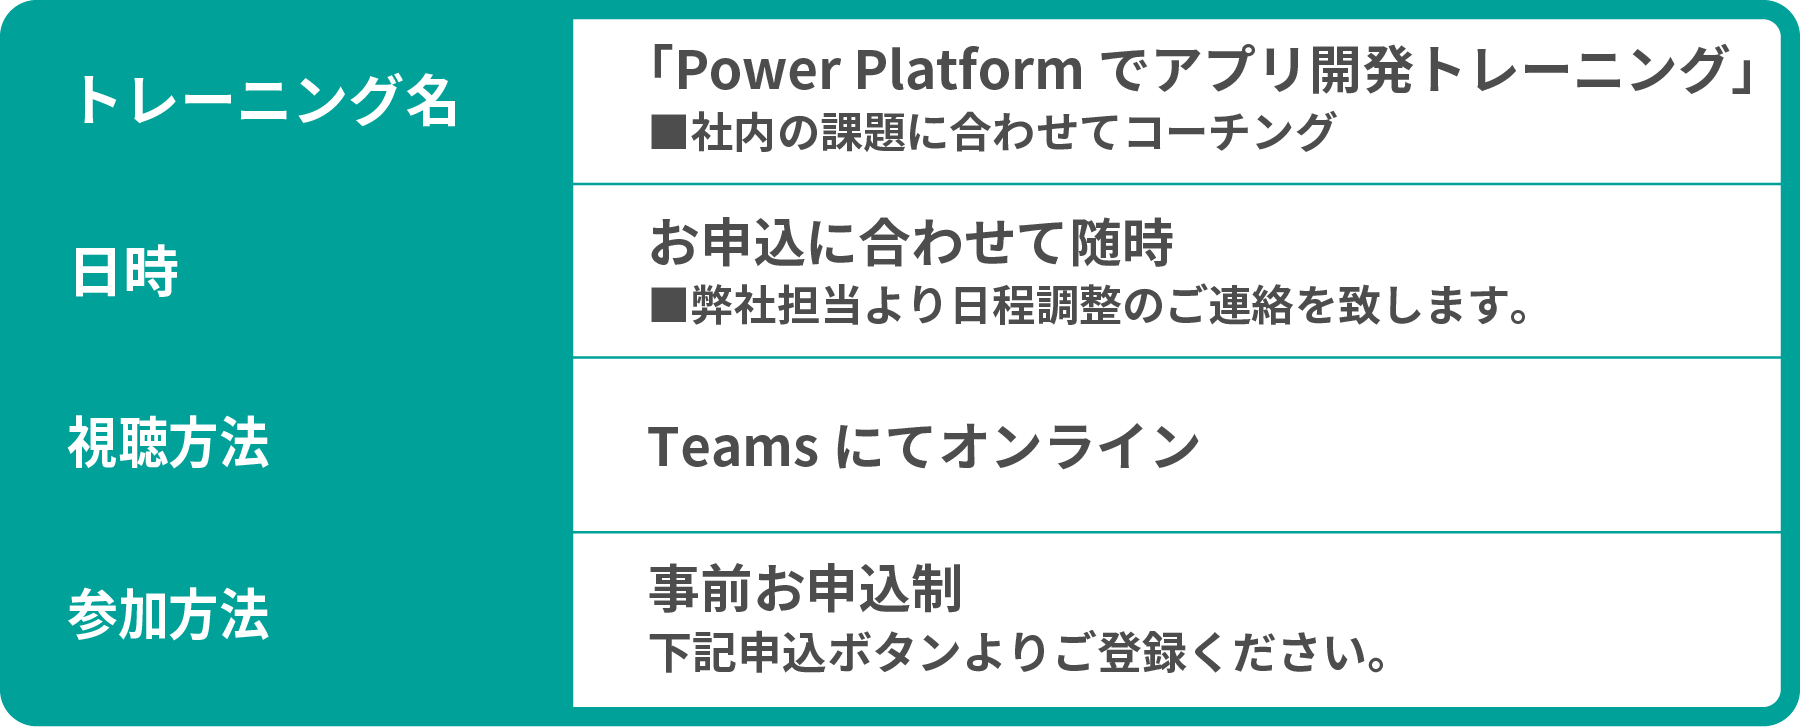 appsws_powerplatform_about.png